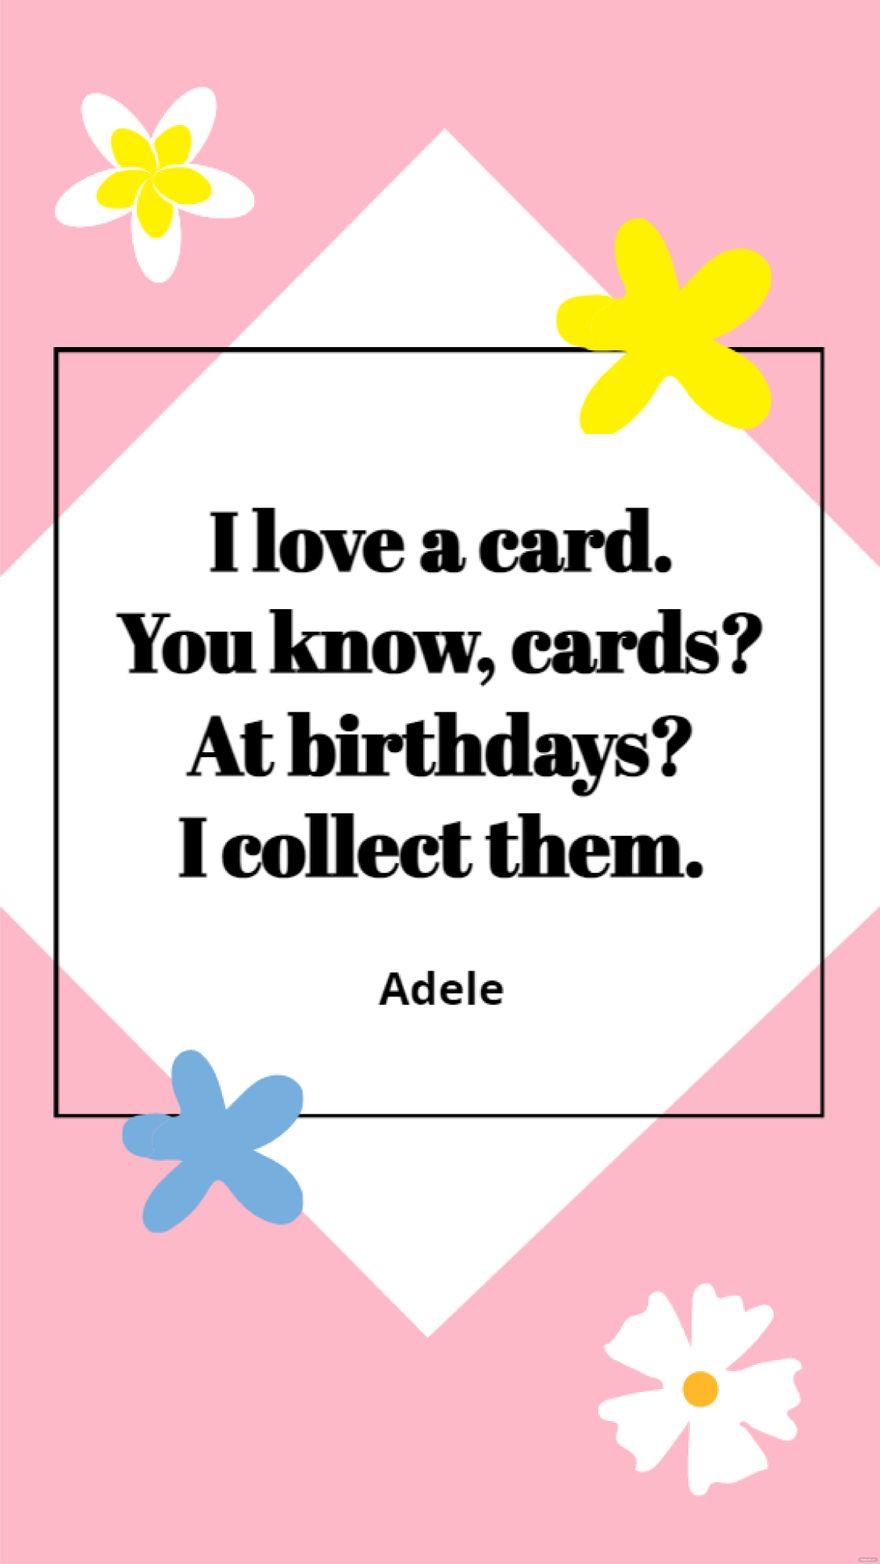 Adele - I love a card. You know, cards? At birthdays? I collect them.